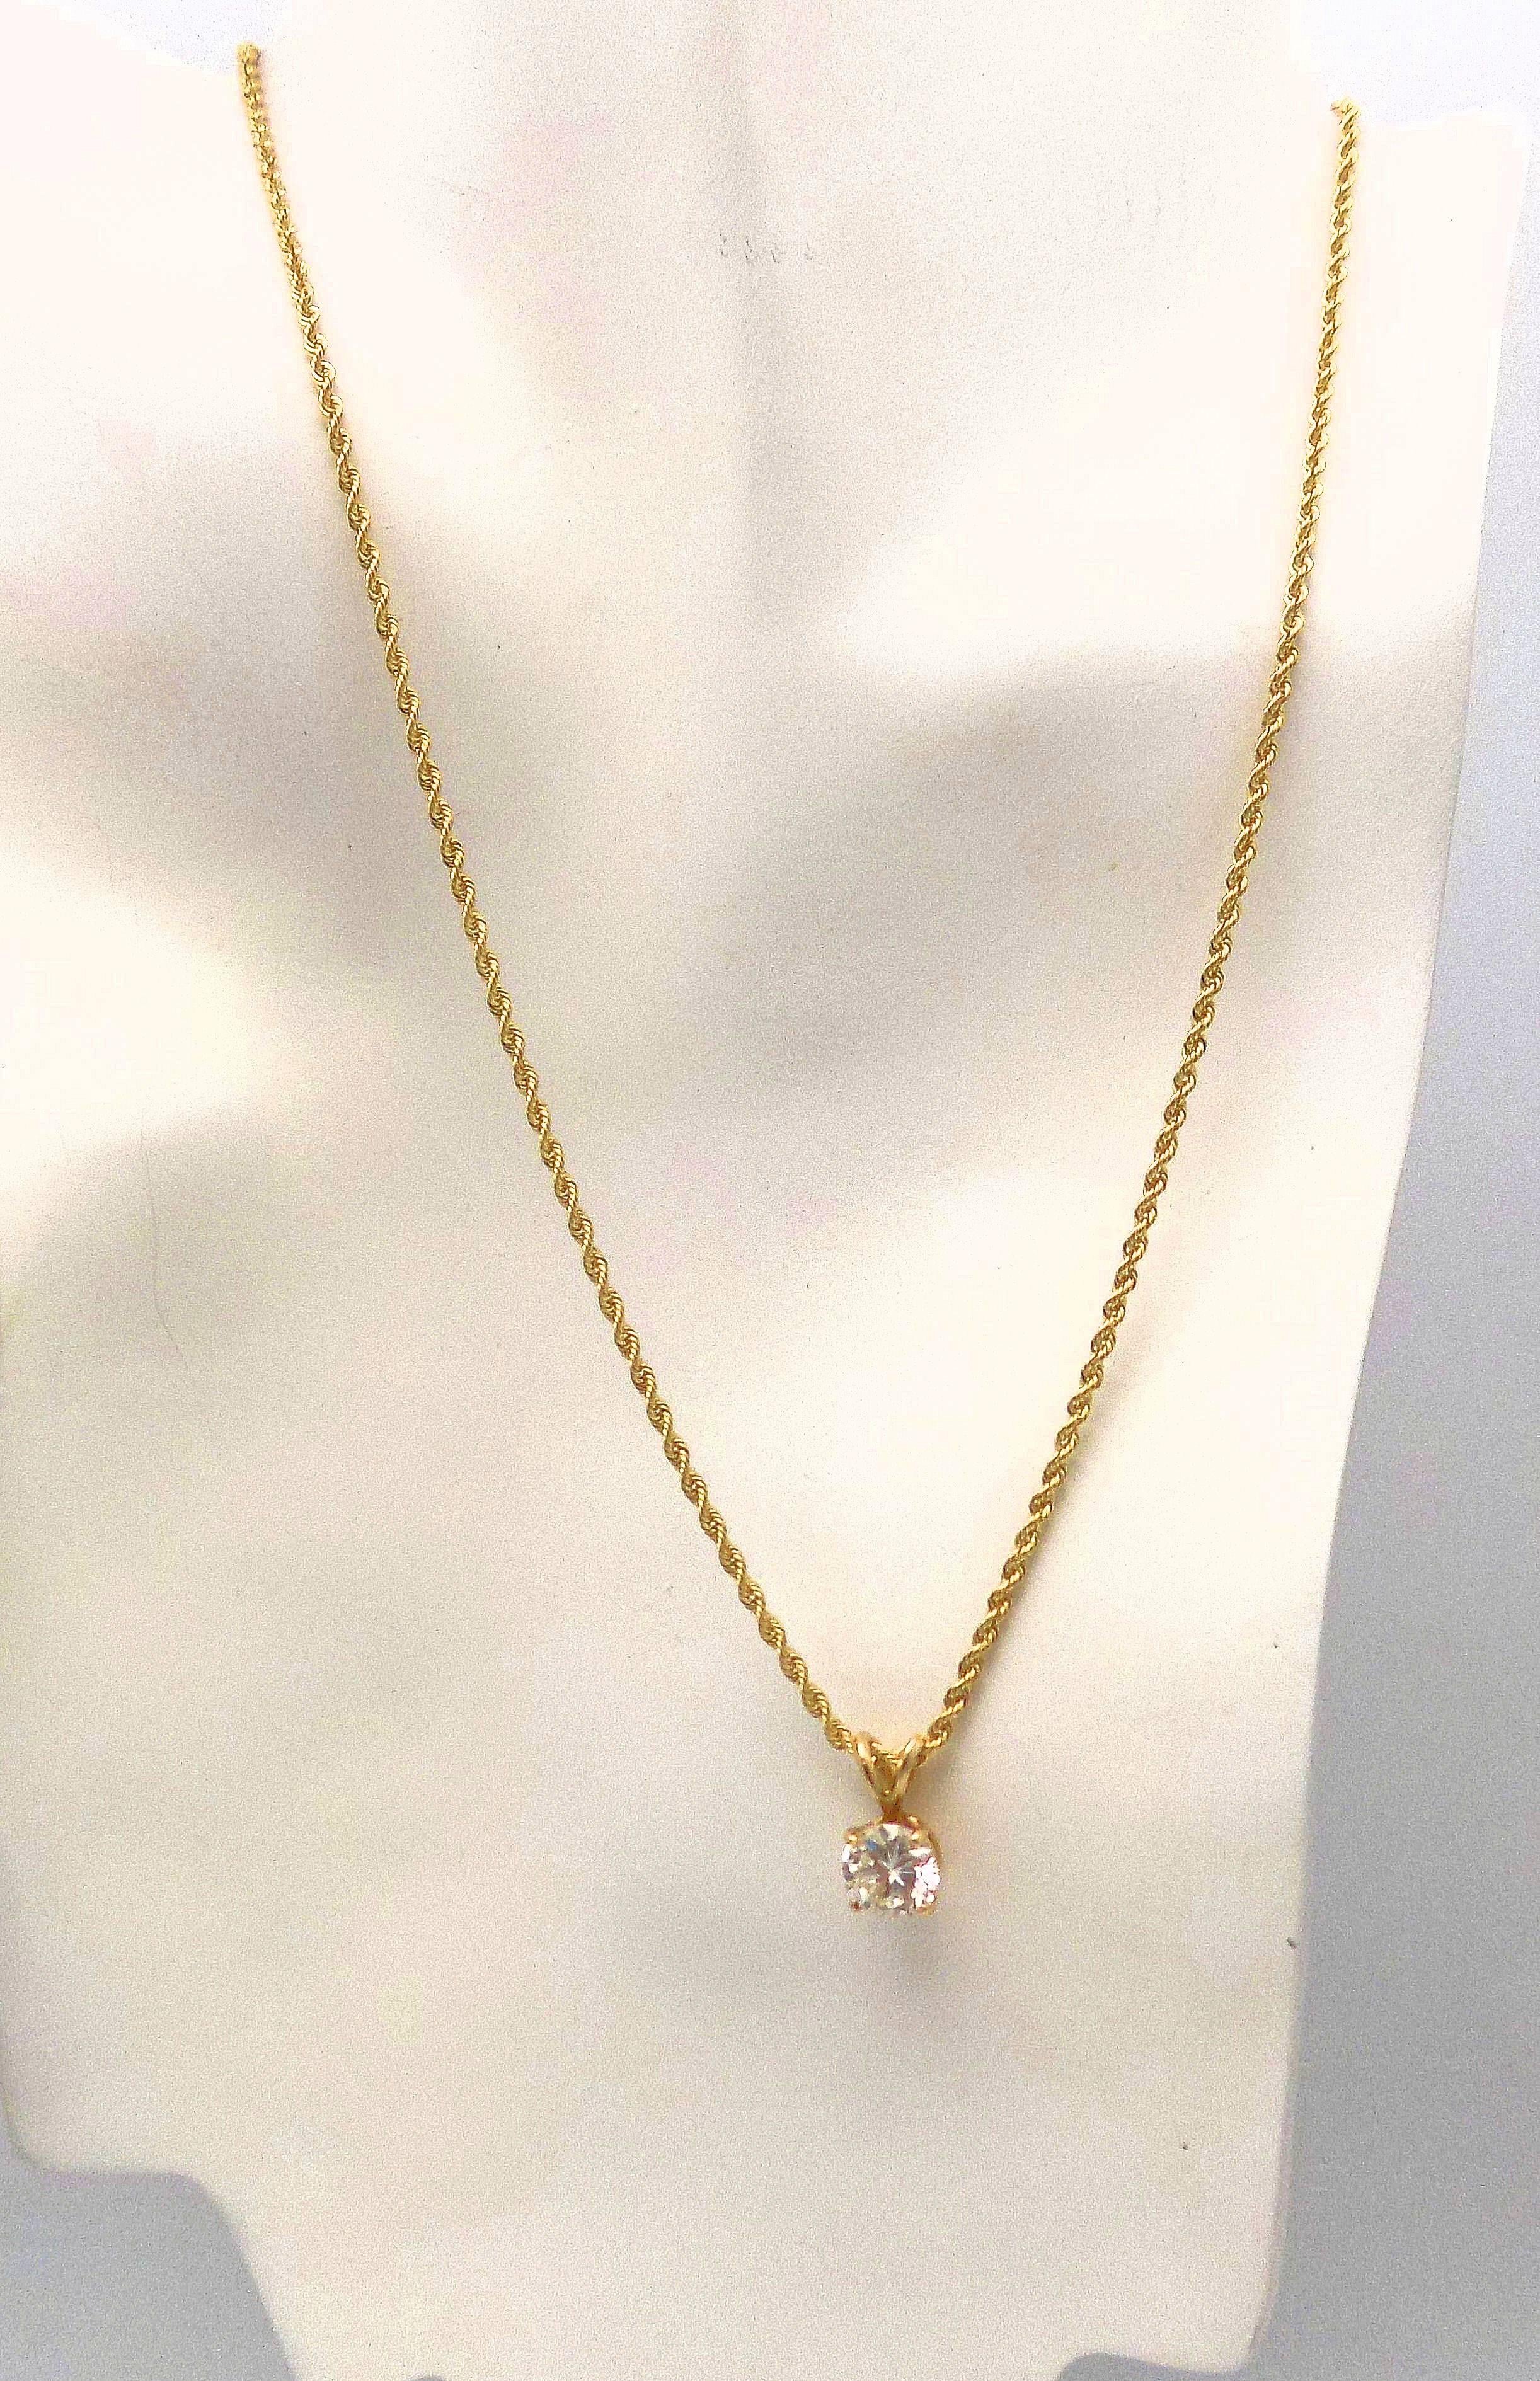 Classic design that never goes out of style. 14 Karat Yellow Gold Pendant Featuring 1 Round Brilliant Diamond 1.90 Carat SI-3, J-K; 18